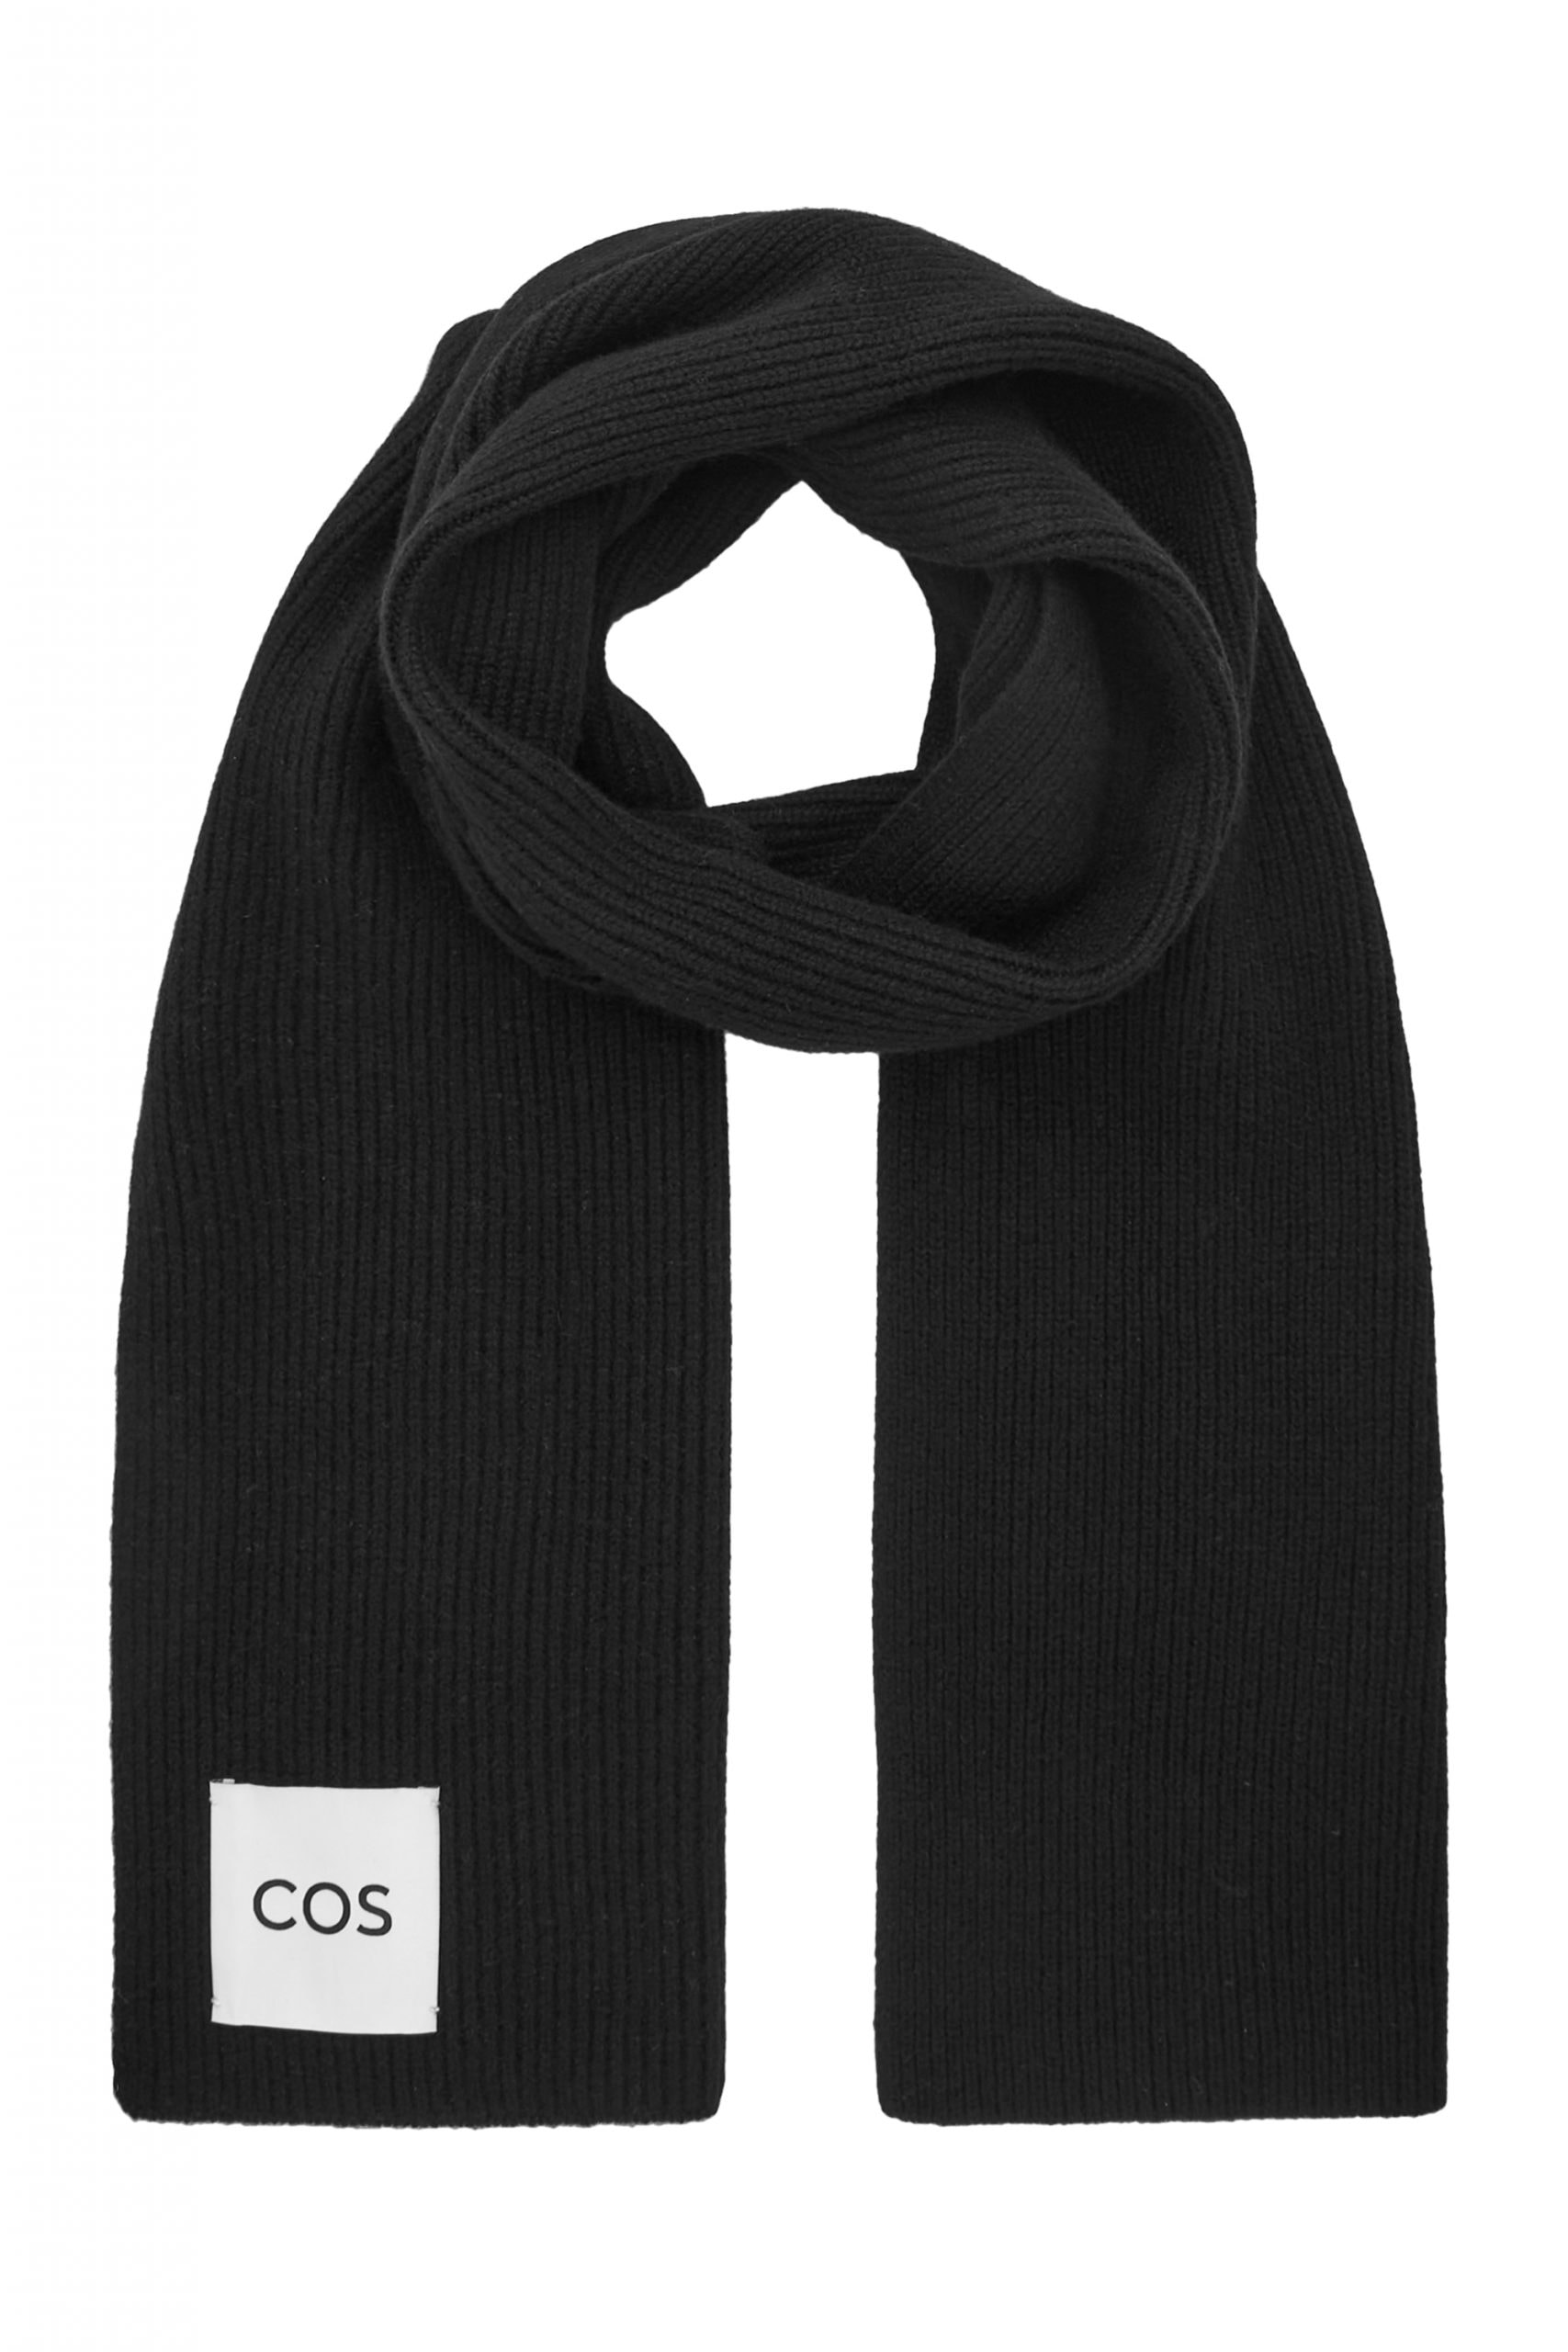 COS 2022 Winter collection